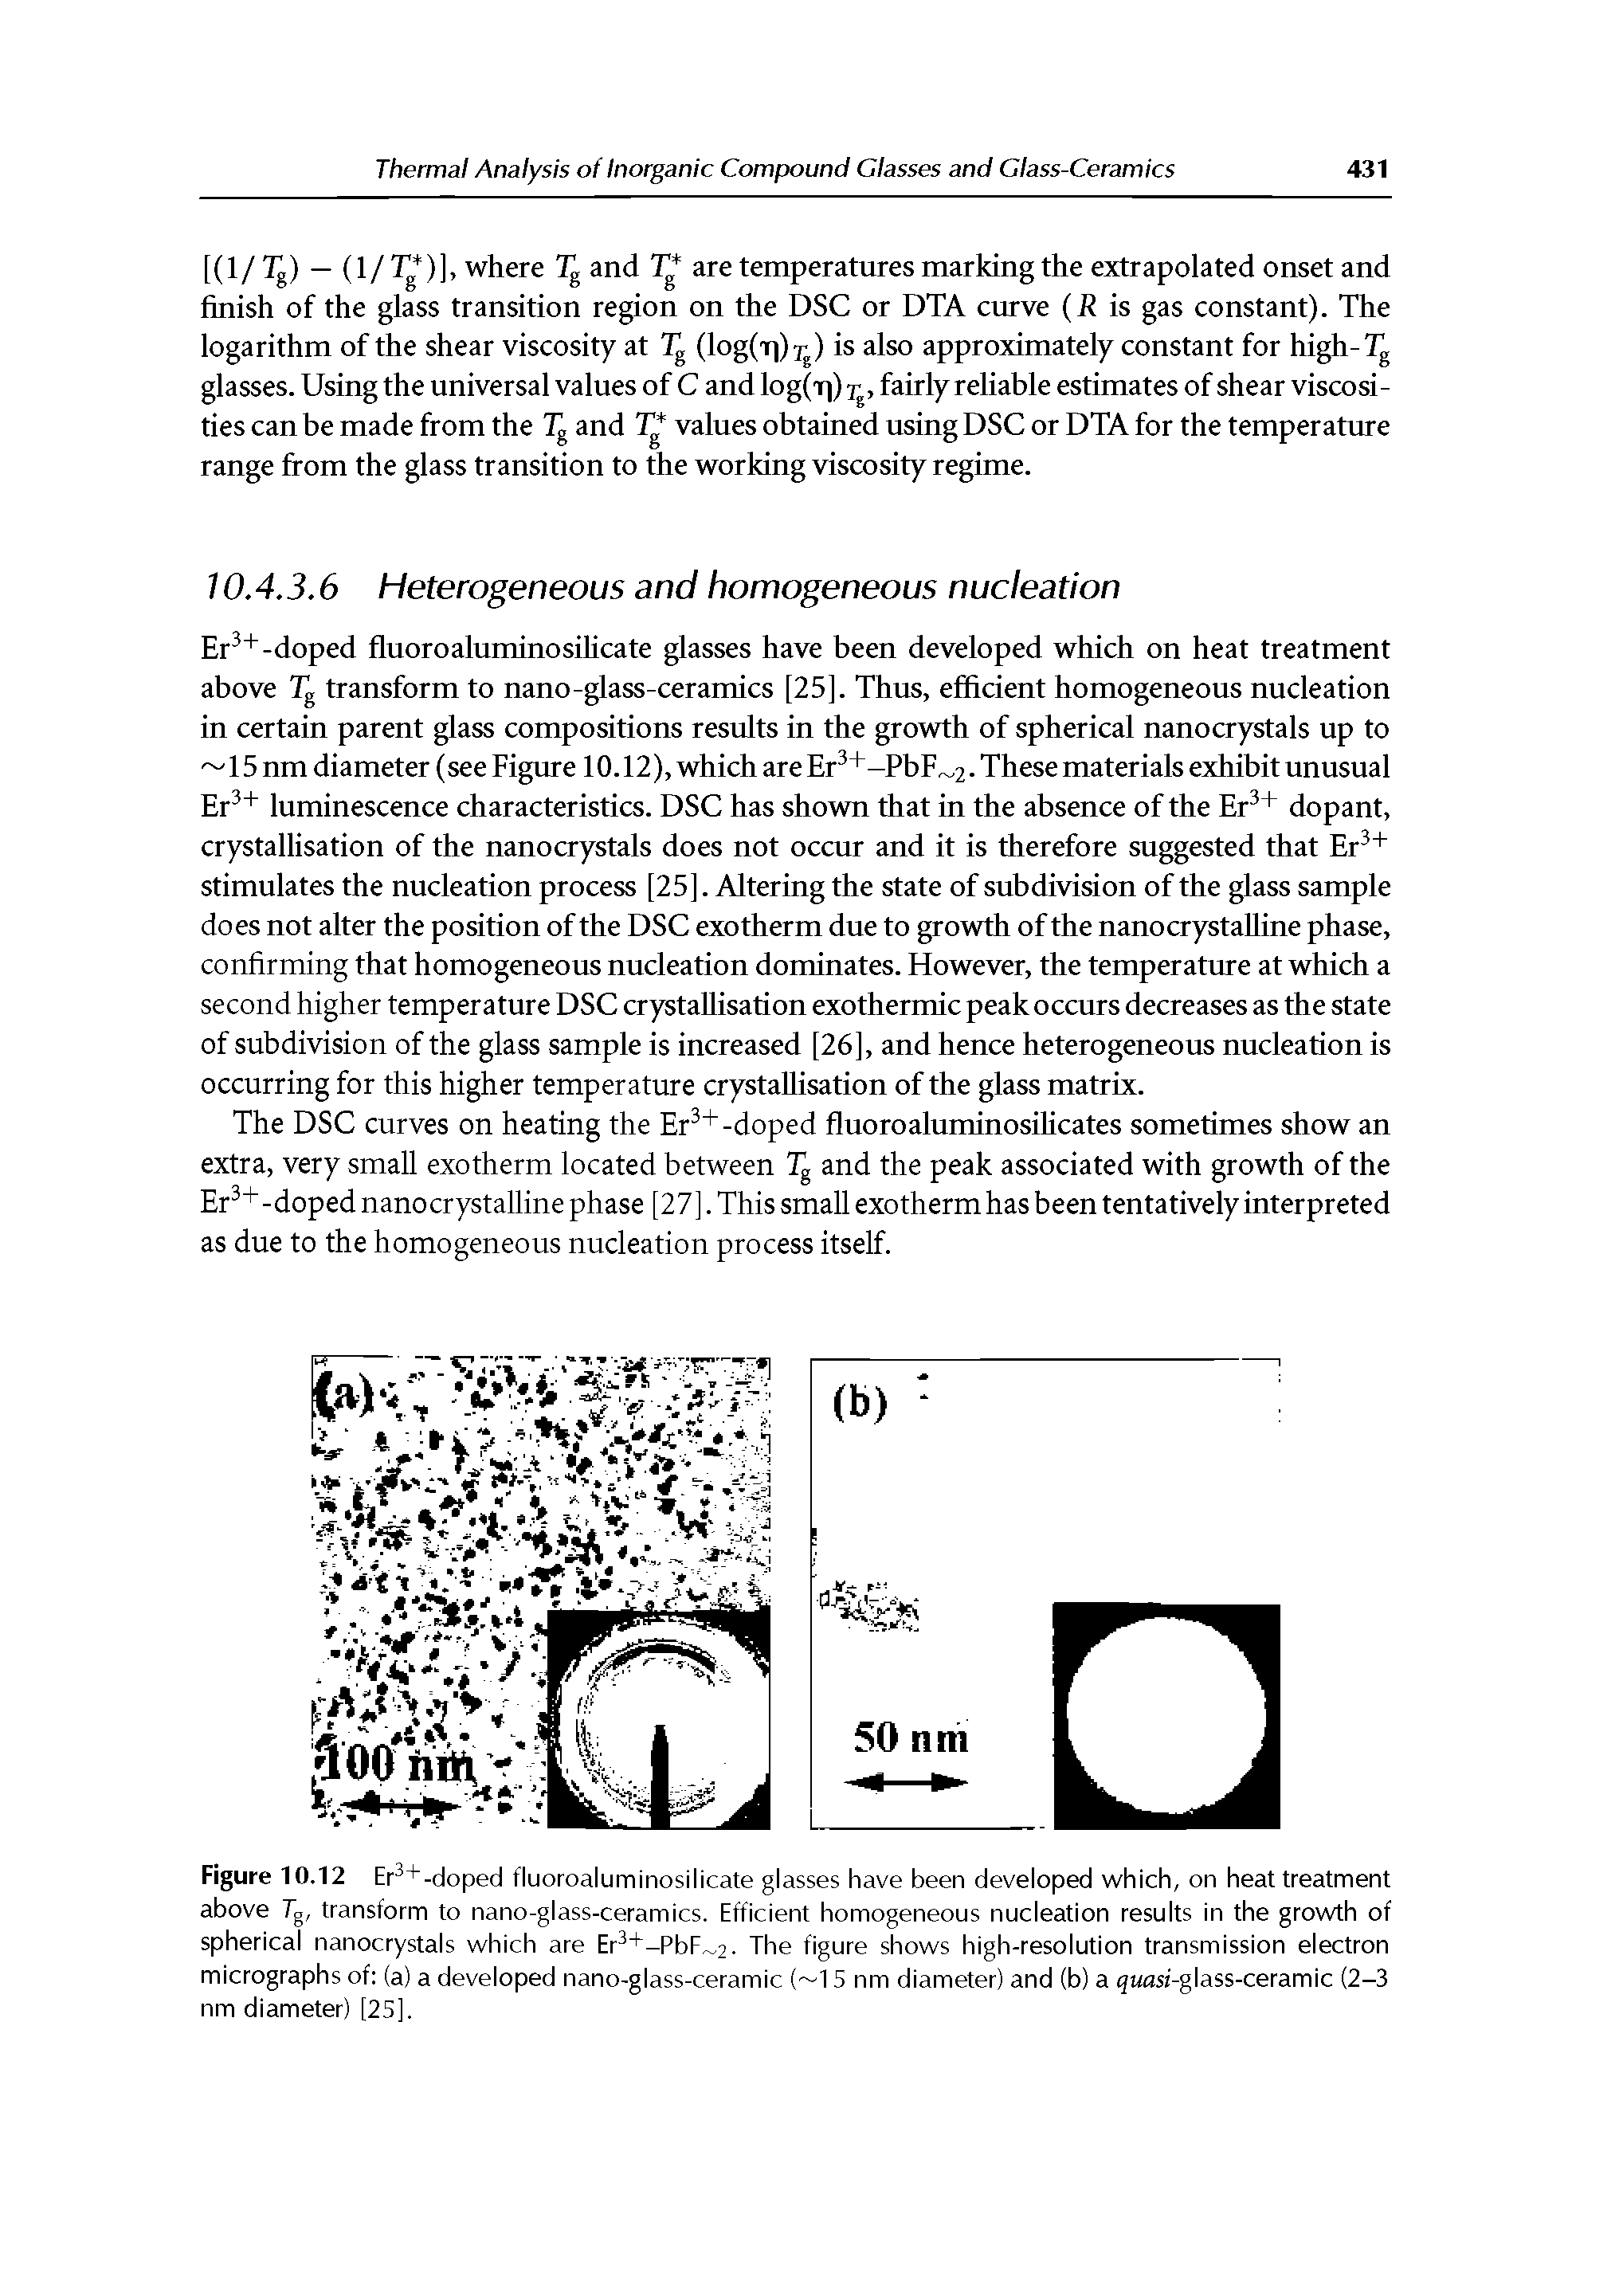 Figure 10.12 Er +-doped fluoroaluminosilicate glasses have been developed which, on heat treatment above 7g, transform to nano-glass-ceramics. Efficient homogeneous nucleation results in the growth of spherical nanocrystals which are Er +-PbF...2. The figure shows high-resolution transmission electron micrographs of (a) a developed nano-glass-ceramic ( 15 nm diameter) and (b) a quasr-glass-ceramic (2-3 nm diameter) [25].